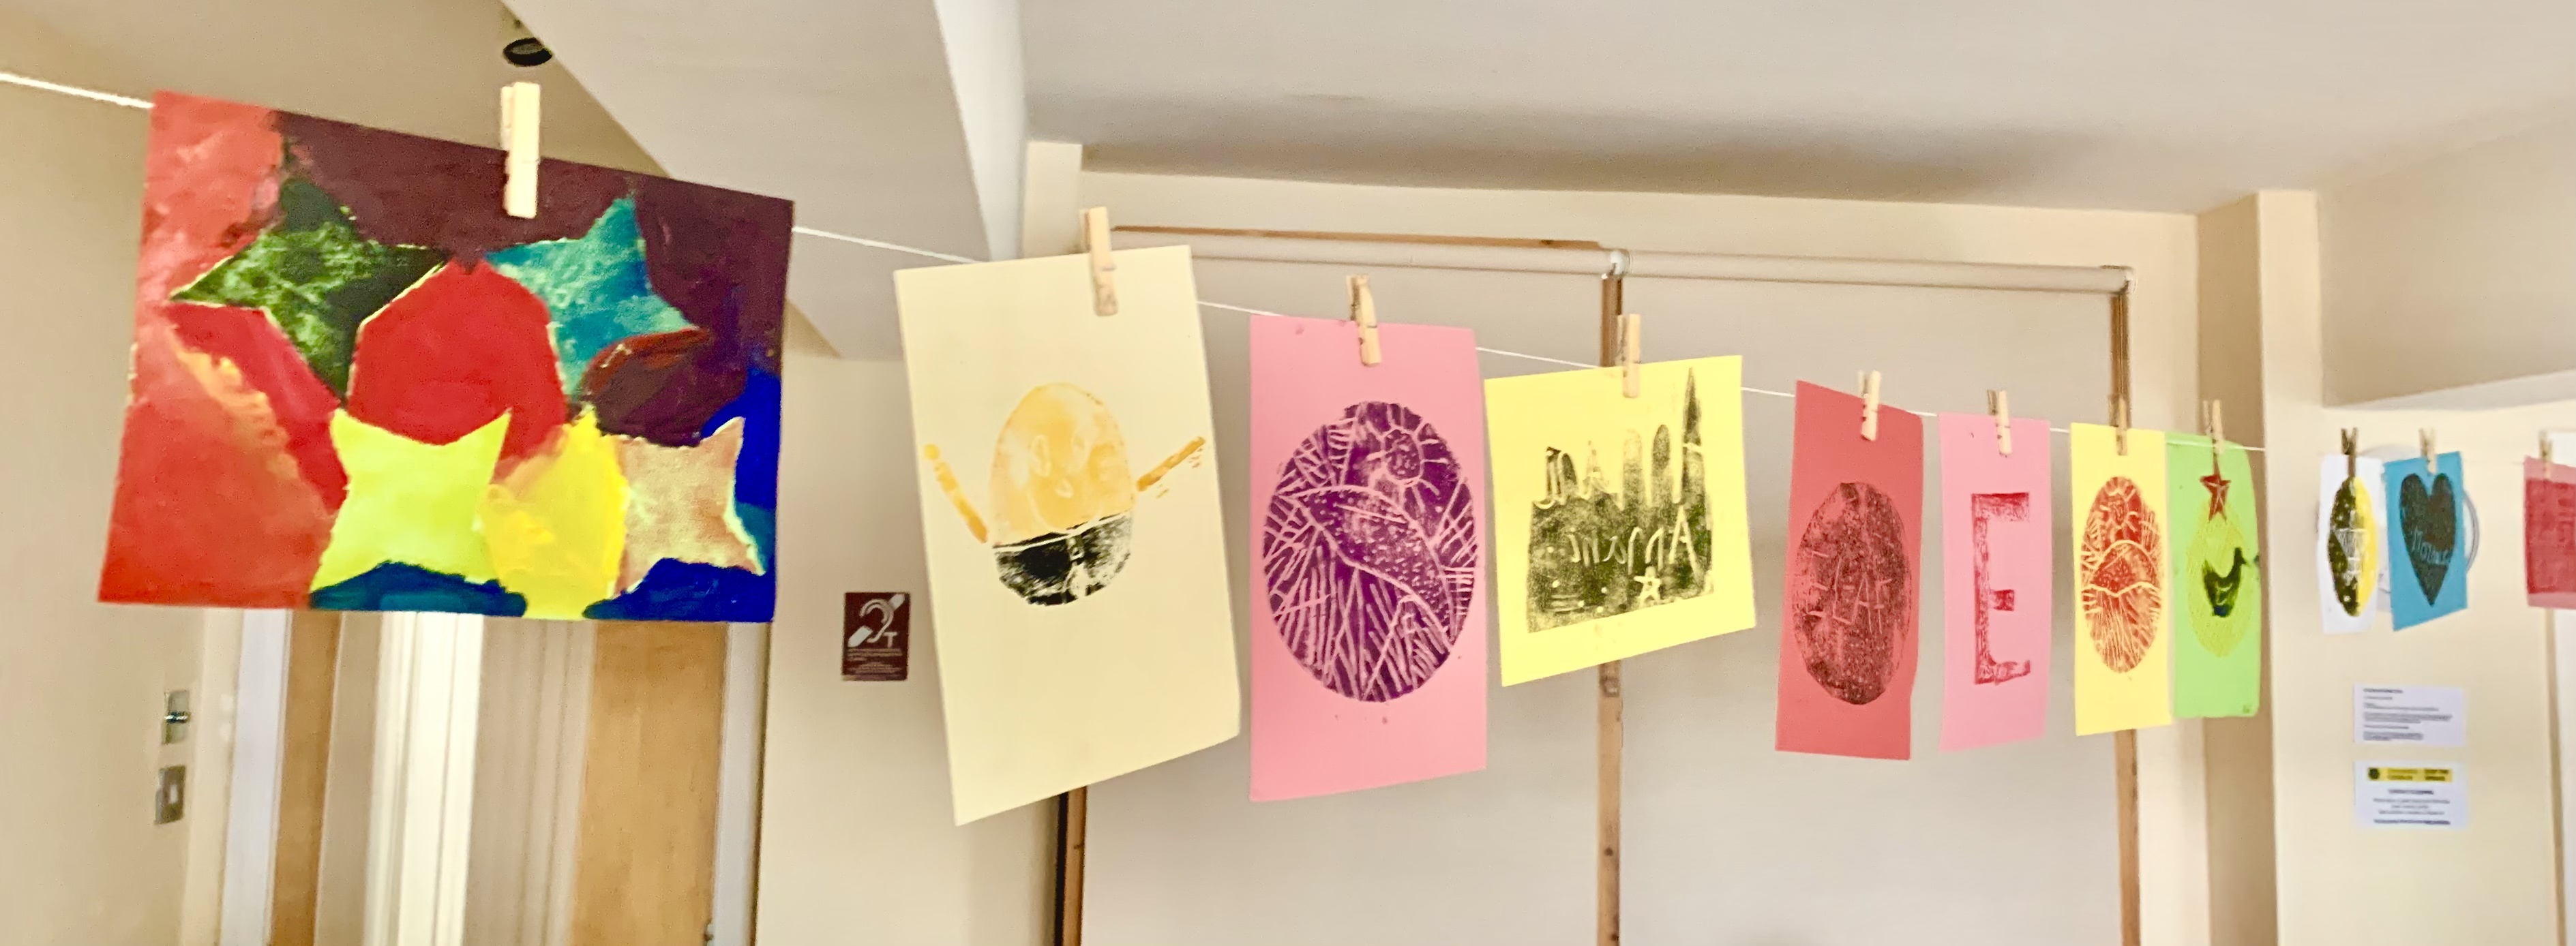 String of prints by youth group